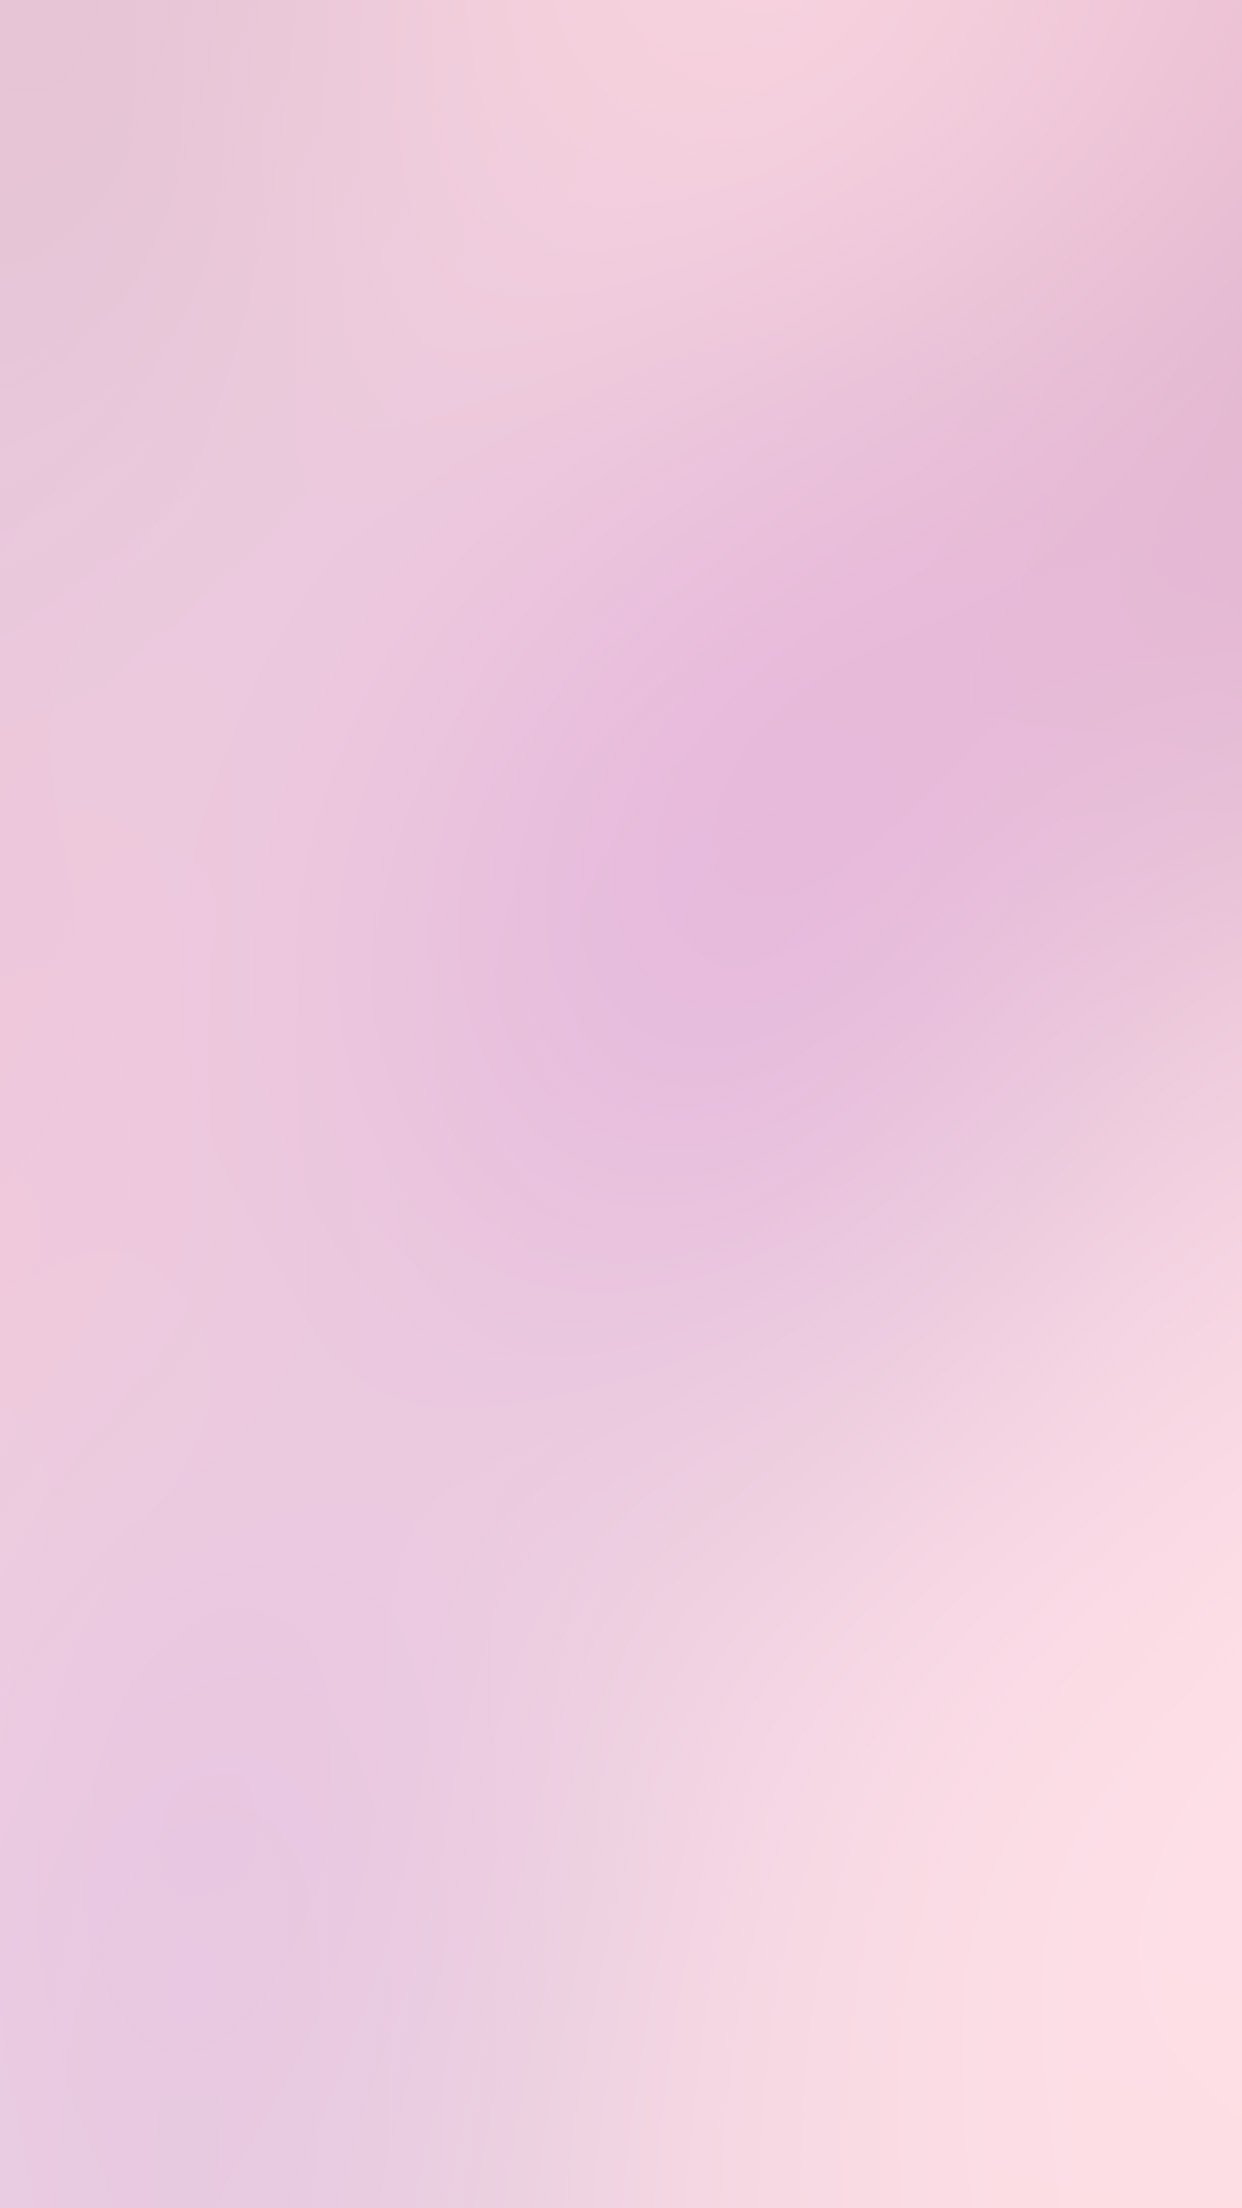 Iphone 6 Plus - Baby Pink Iphone Background , HD Wallpaper & Backgrounds